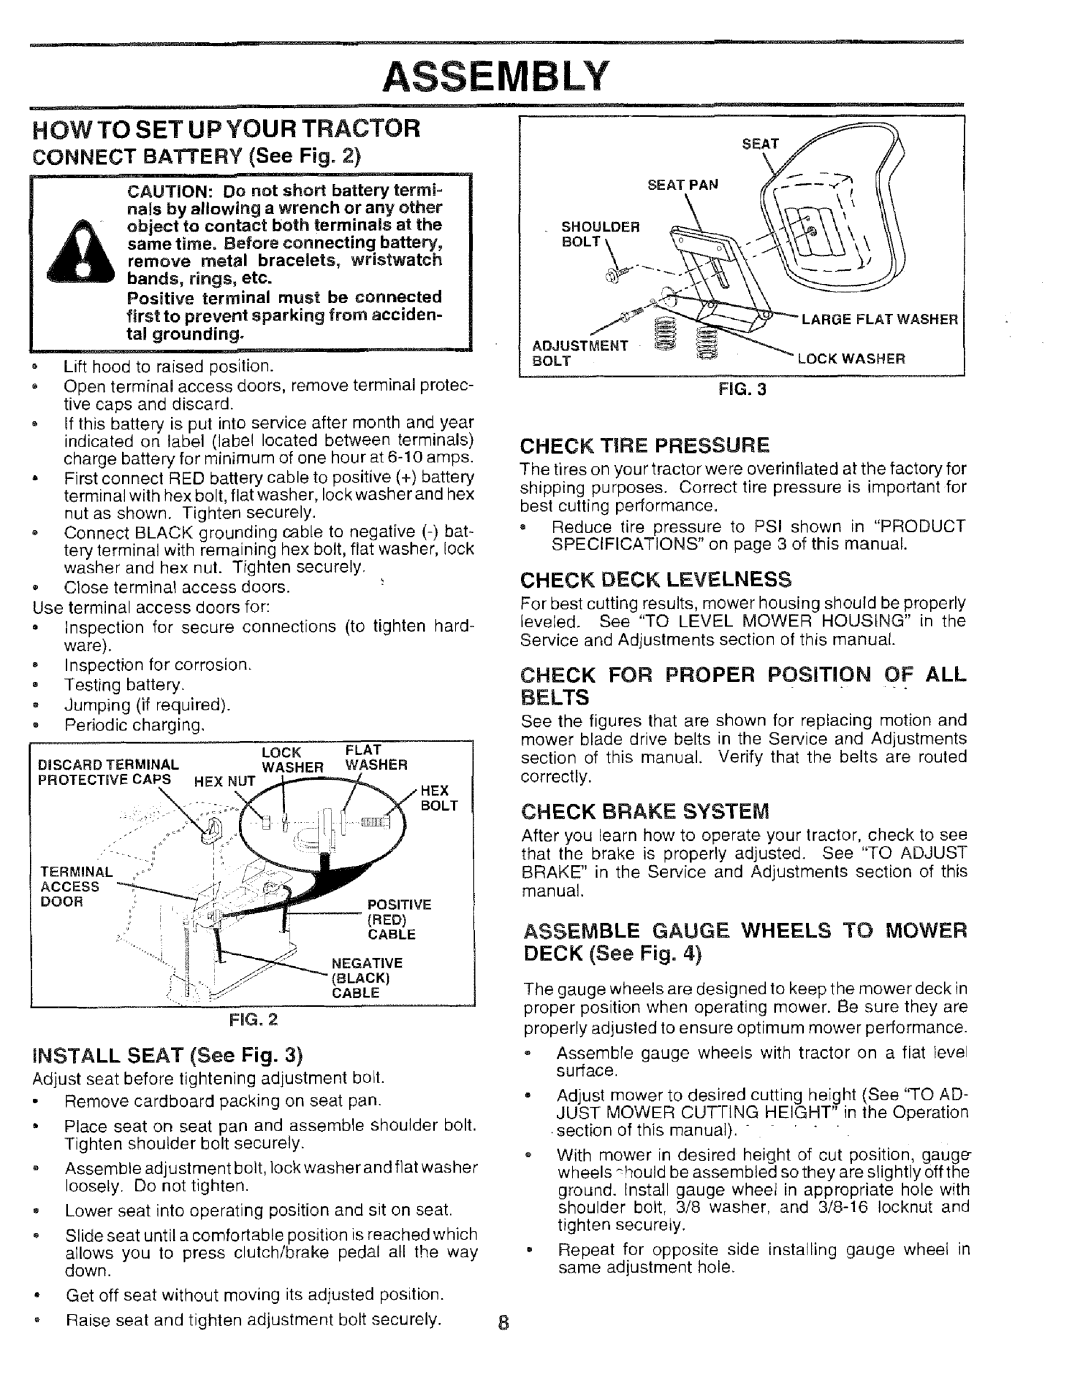 Sears 917.259567 Asse Ly, How To Set Up Your Tractor, CONNECT BATTERY See Fig, INSTALL SEAT See Fig, CHECK TiRE PRESSURE 